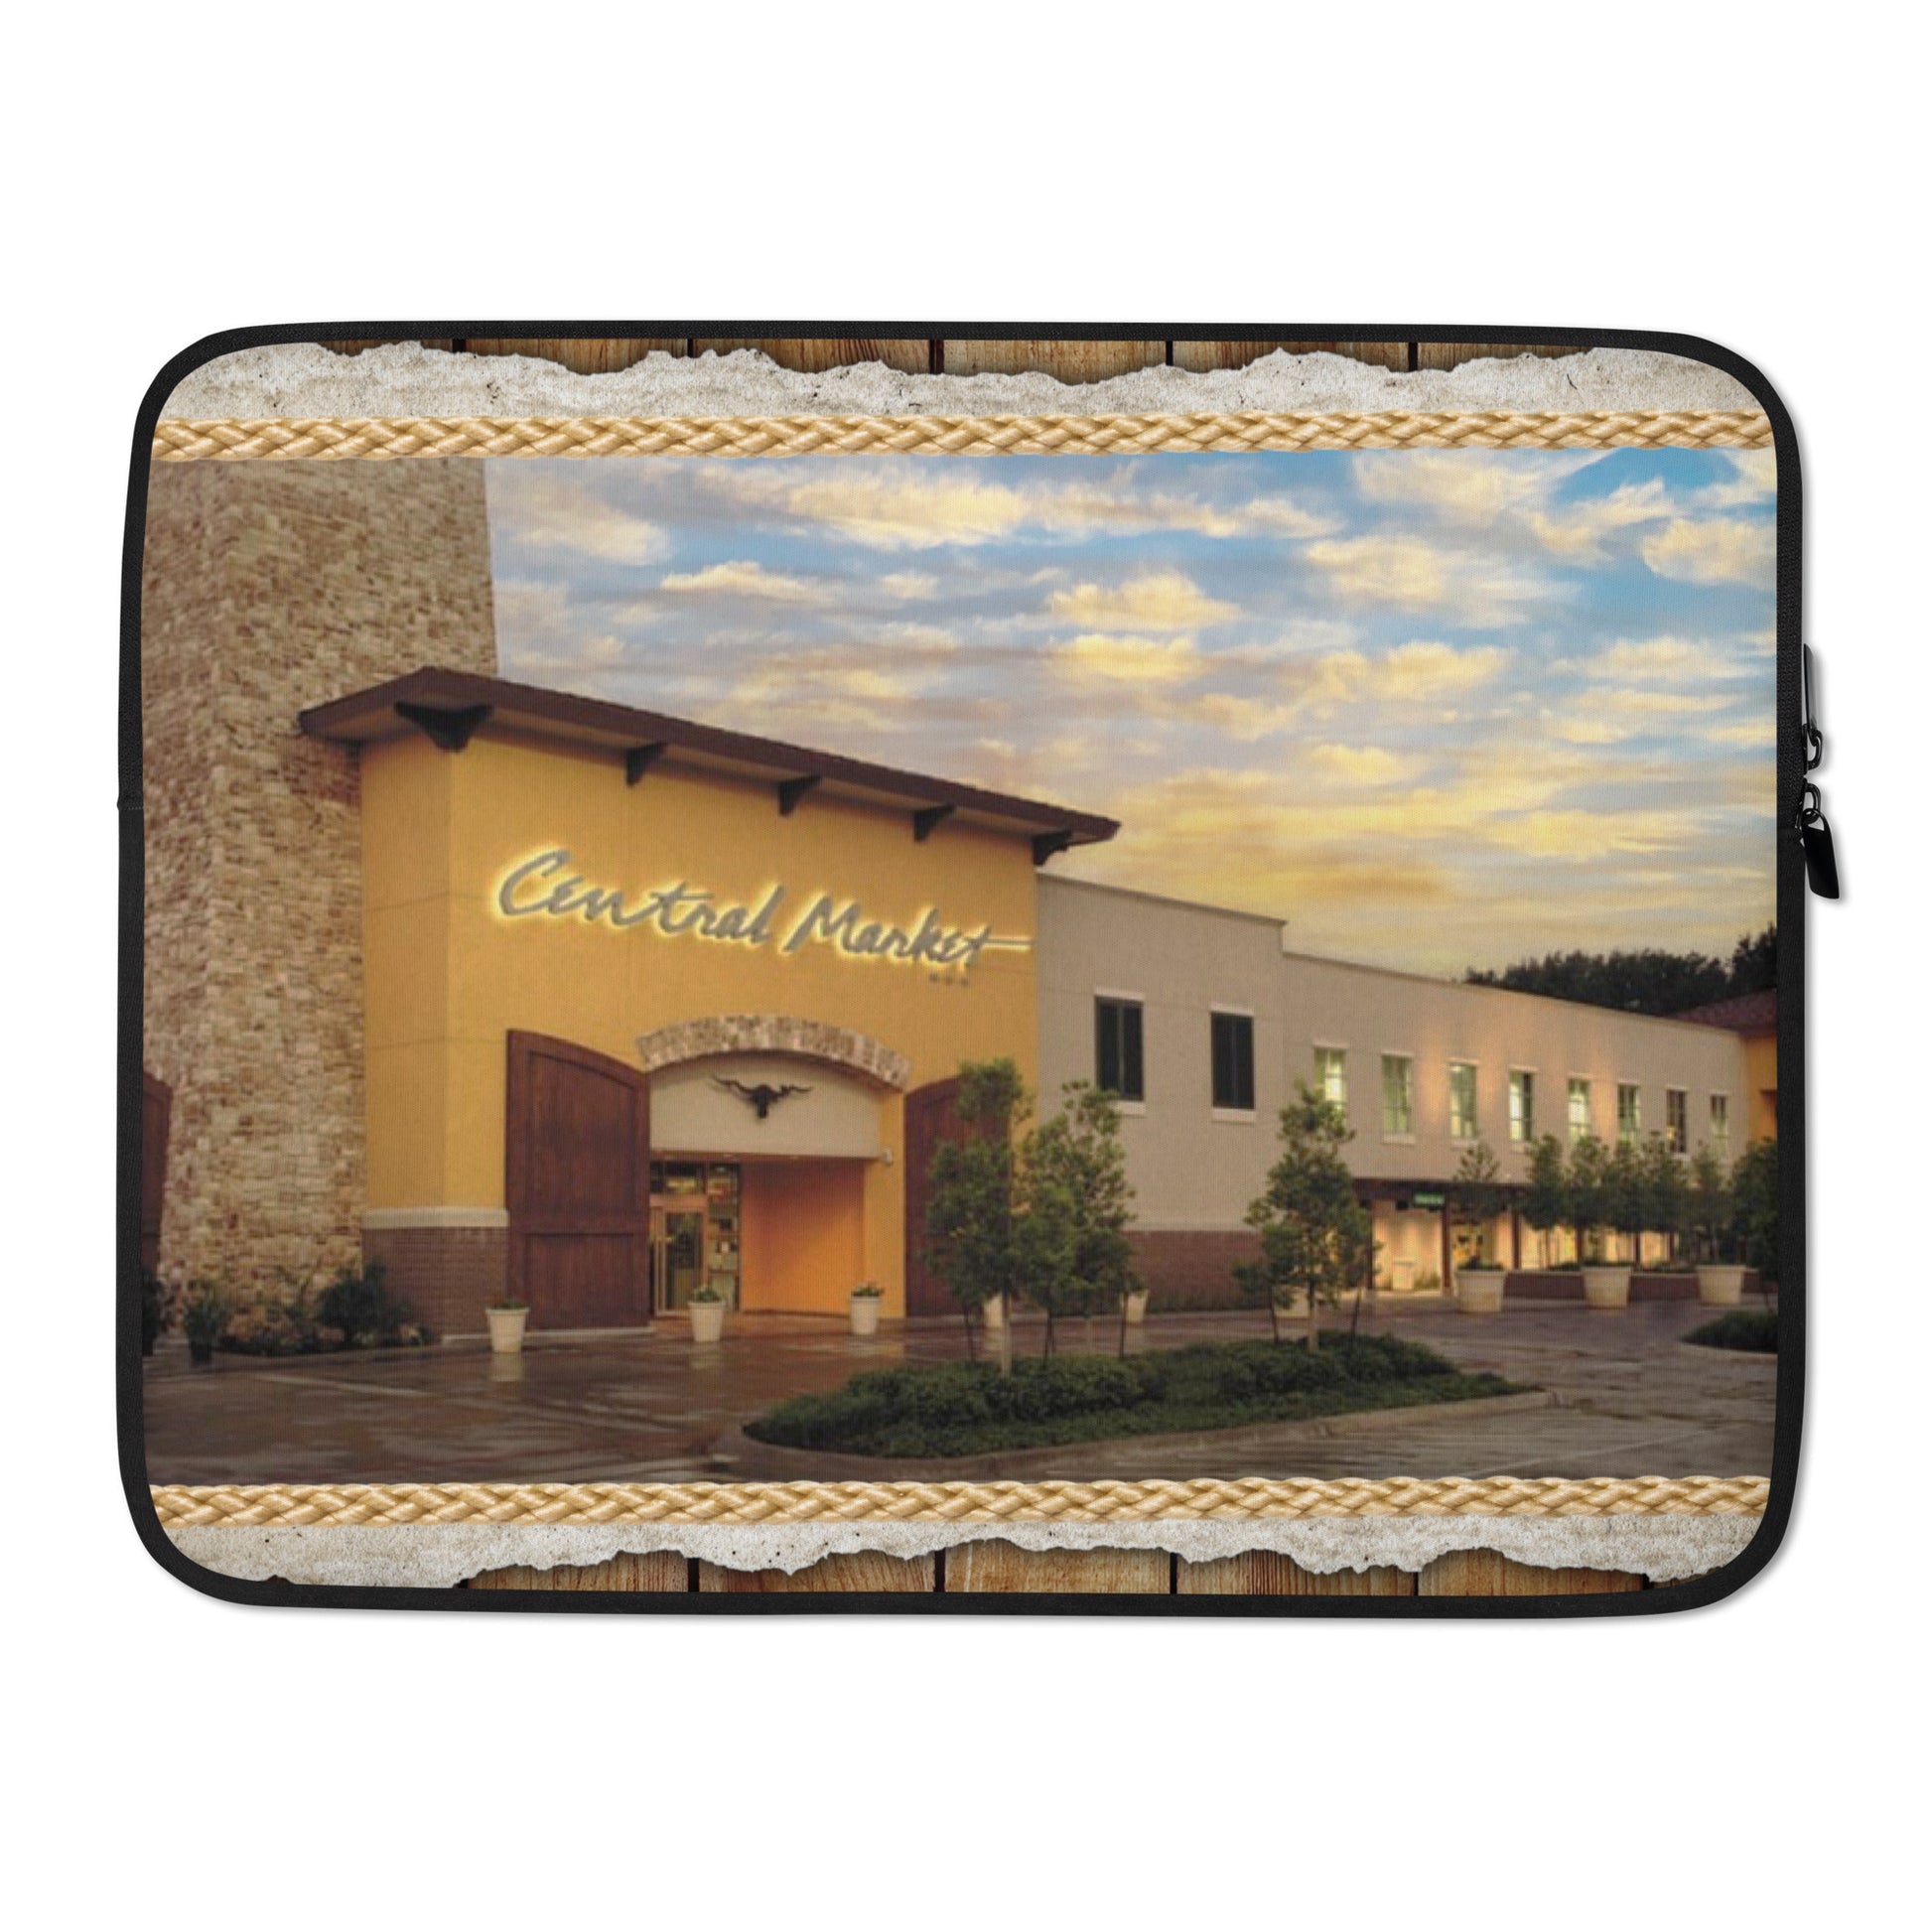 Fort Worth Central Market Laptop Sleeve CedarHill Country Market